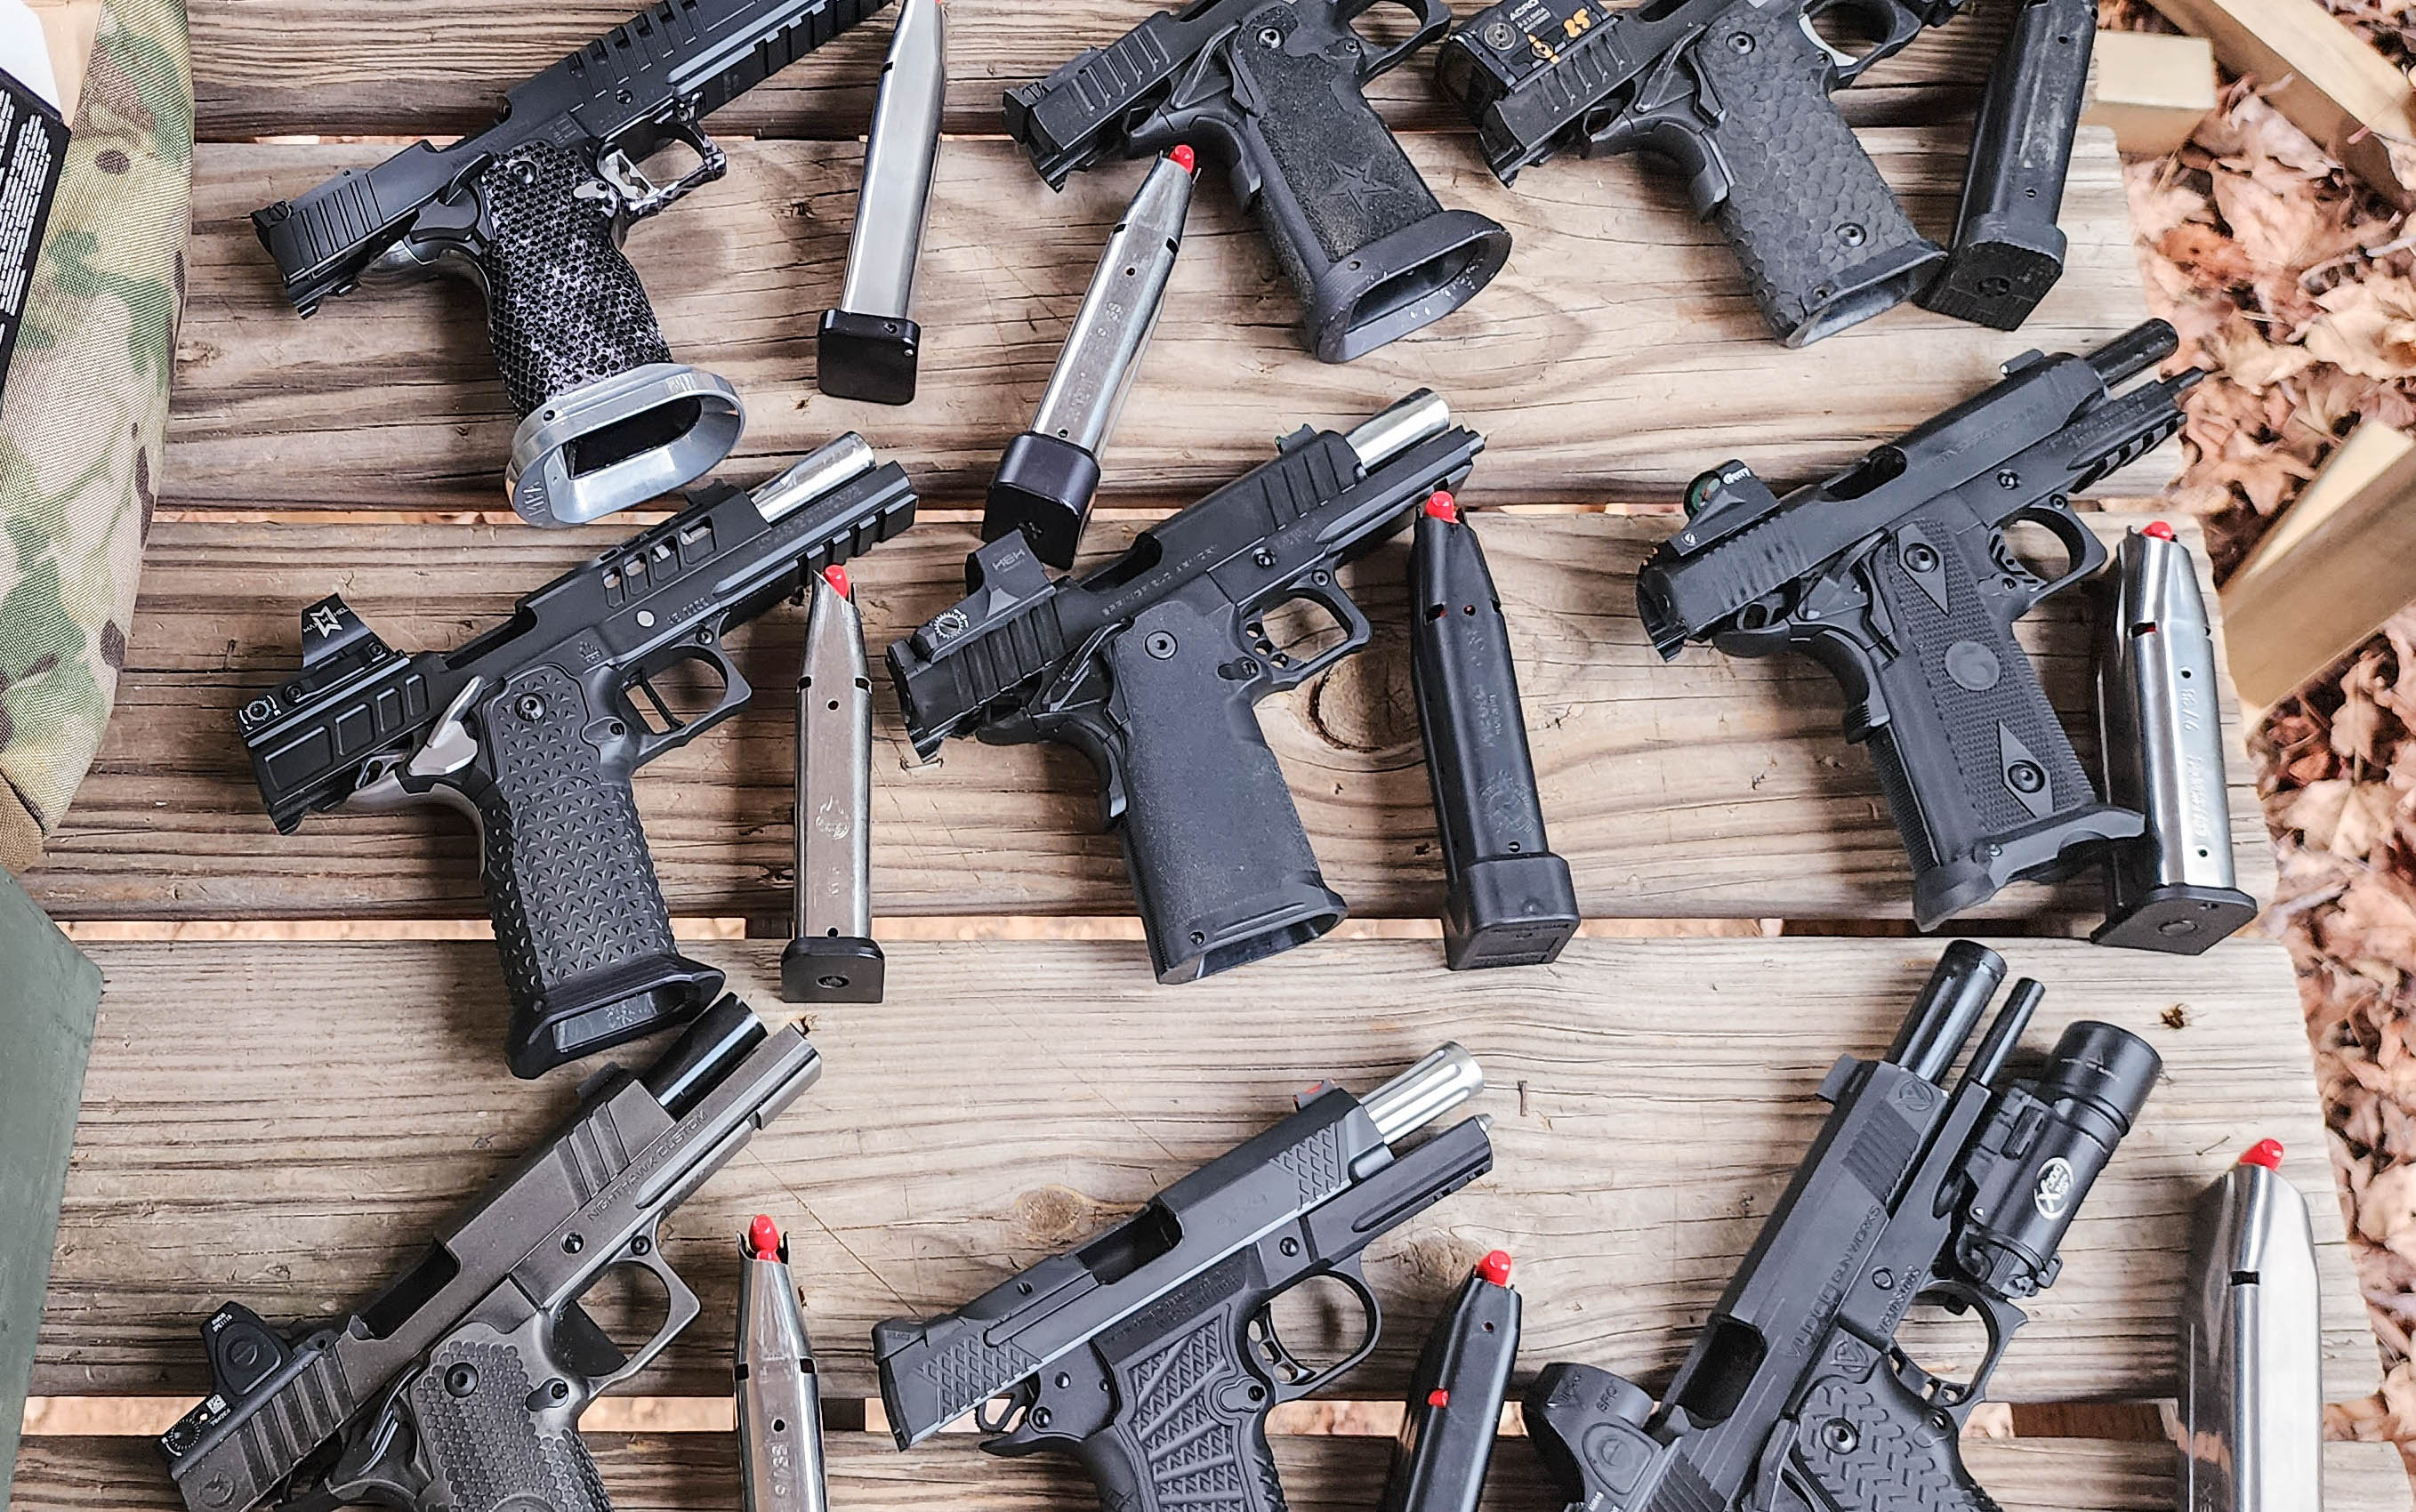 The Best 2011 pistols were tested for accuracy and reliability.